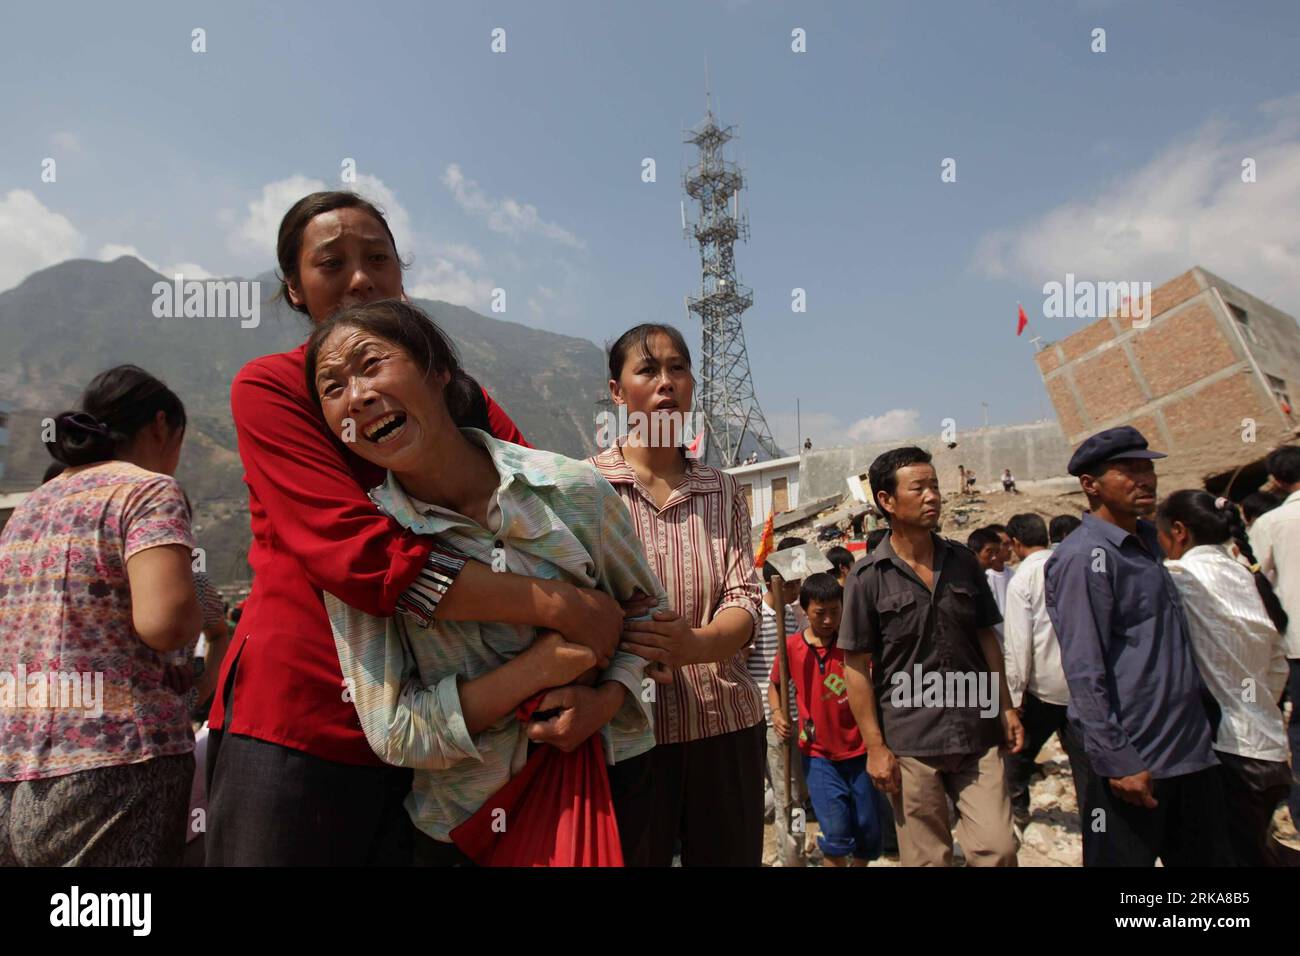 Bildnummer: 54285519  Datum: 09.08.2010  Copyright: imago/Xinhua (100809) -- ZHOUQU, Aug. 9, 2010 (Xinhua) -- Local residents mourn in landslide-hit Zhouqu County, Gannan Tibetan Autonomous Prefecture in northwest China s Gansu Province, Aug. 9, 2010. The death toll from rain-triggered mudslides in Zhouqu County has risen to 137 as of 4:07 p.m. Monday, with 1,348 others still missing, said the provincial civil affairs department. Rescuers are racing against time in the search for survivors in the mudslide-flattened Zhouqu. (Xinhua/Xing Guangli) (cxy) CHINA-GANSU-ZHOUQU-LANDSLIDE-DEATH TOLL (CN Stock Photo